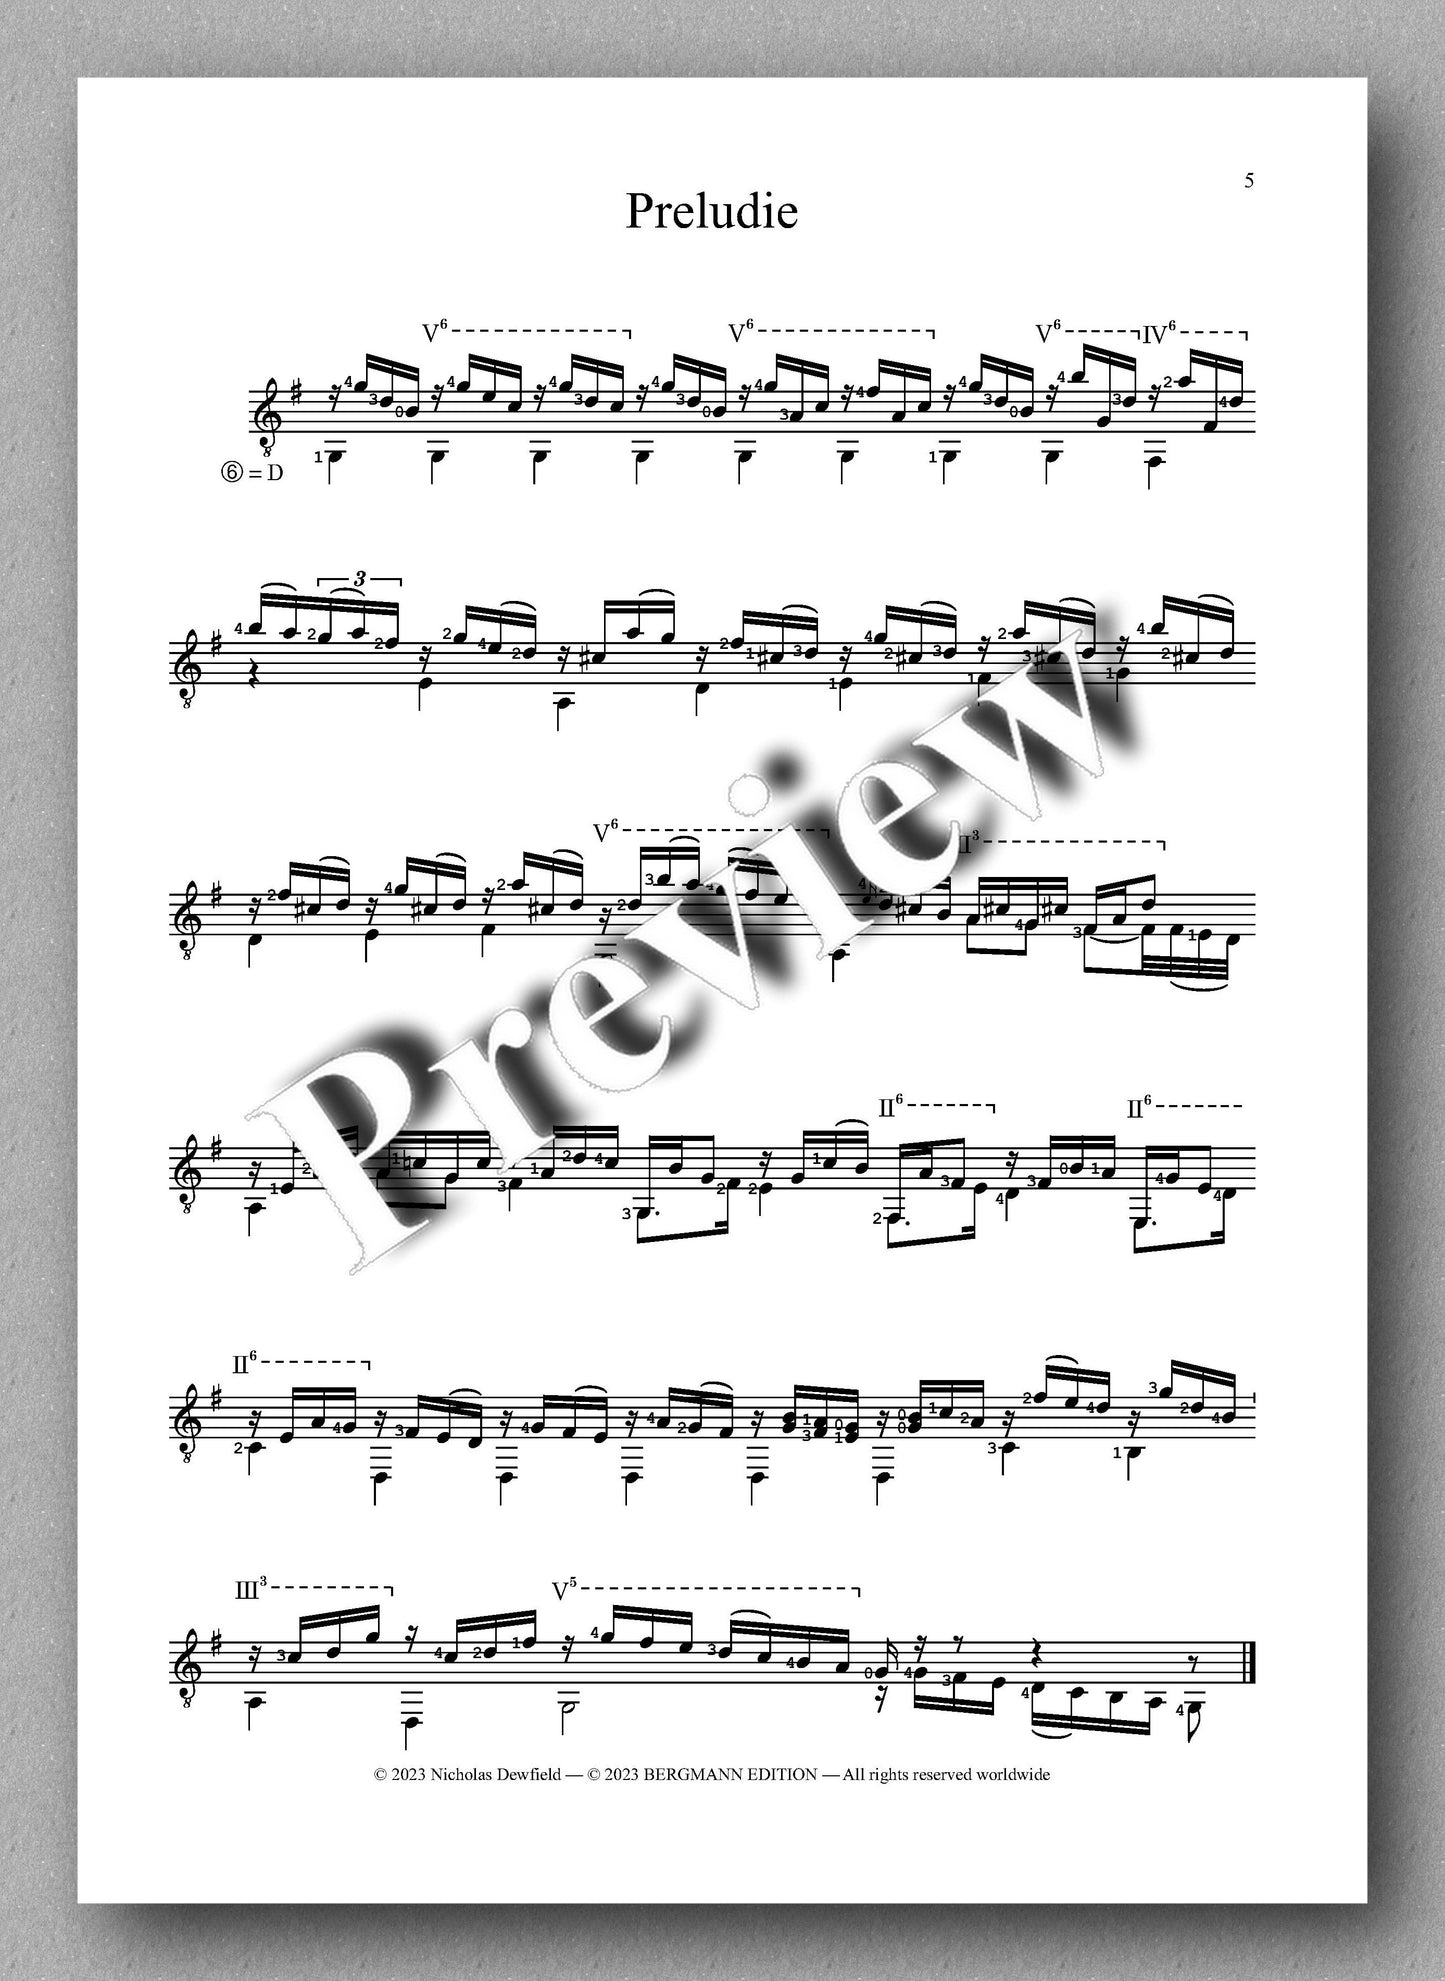 Sylvius Leopold Weiss (1687-1750), Sonata No. 22 - preview of the music score 1